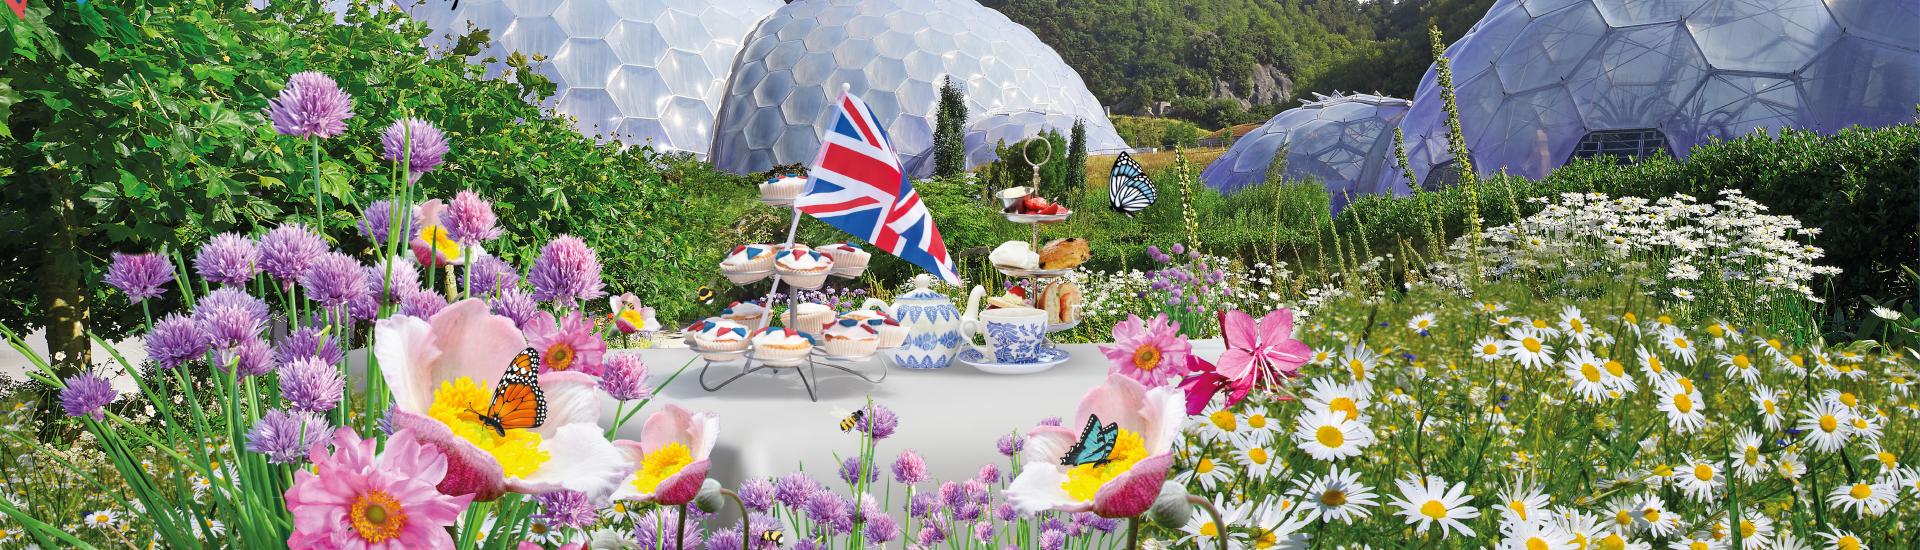 Eden Project Biomes with Jubilee lunch on a table surrounds by flowers, bees and butterflies